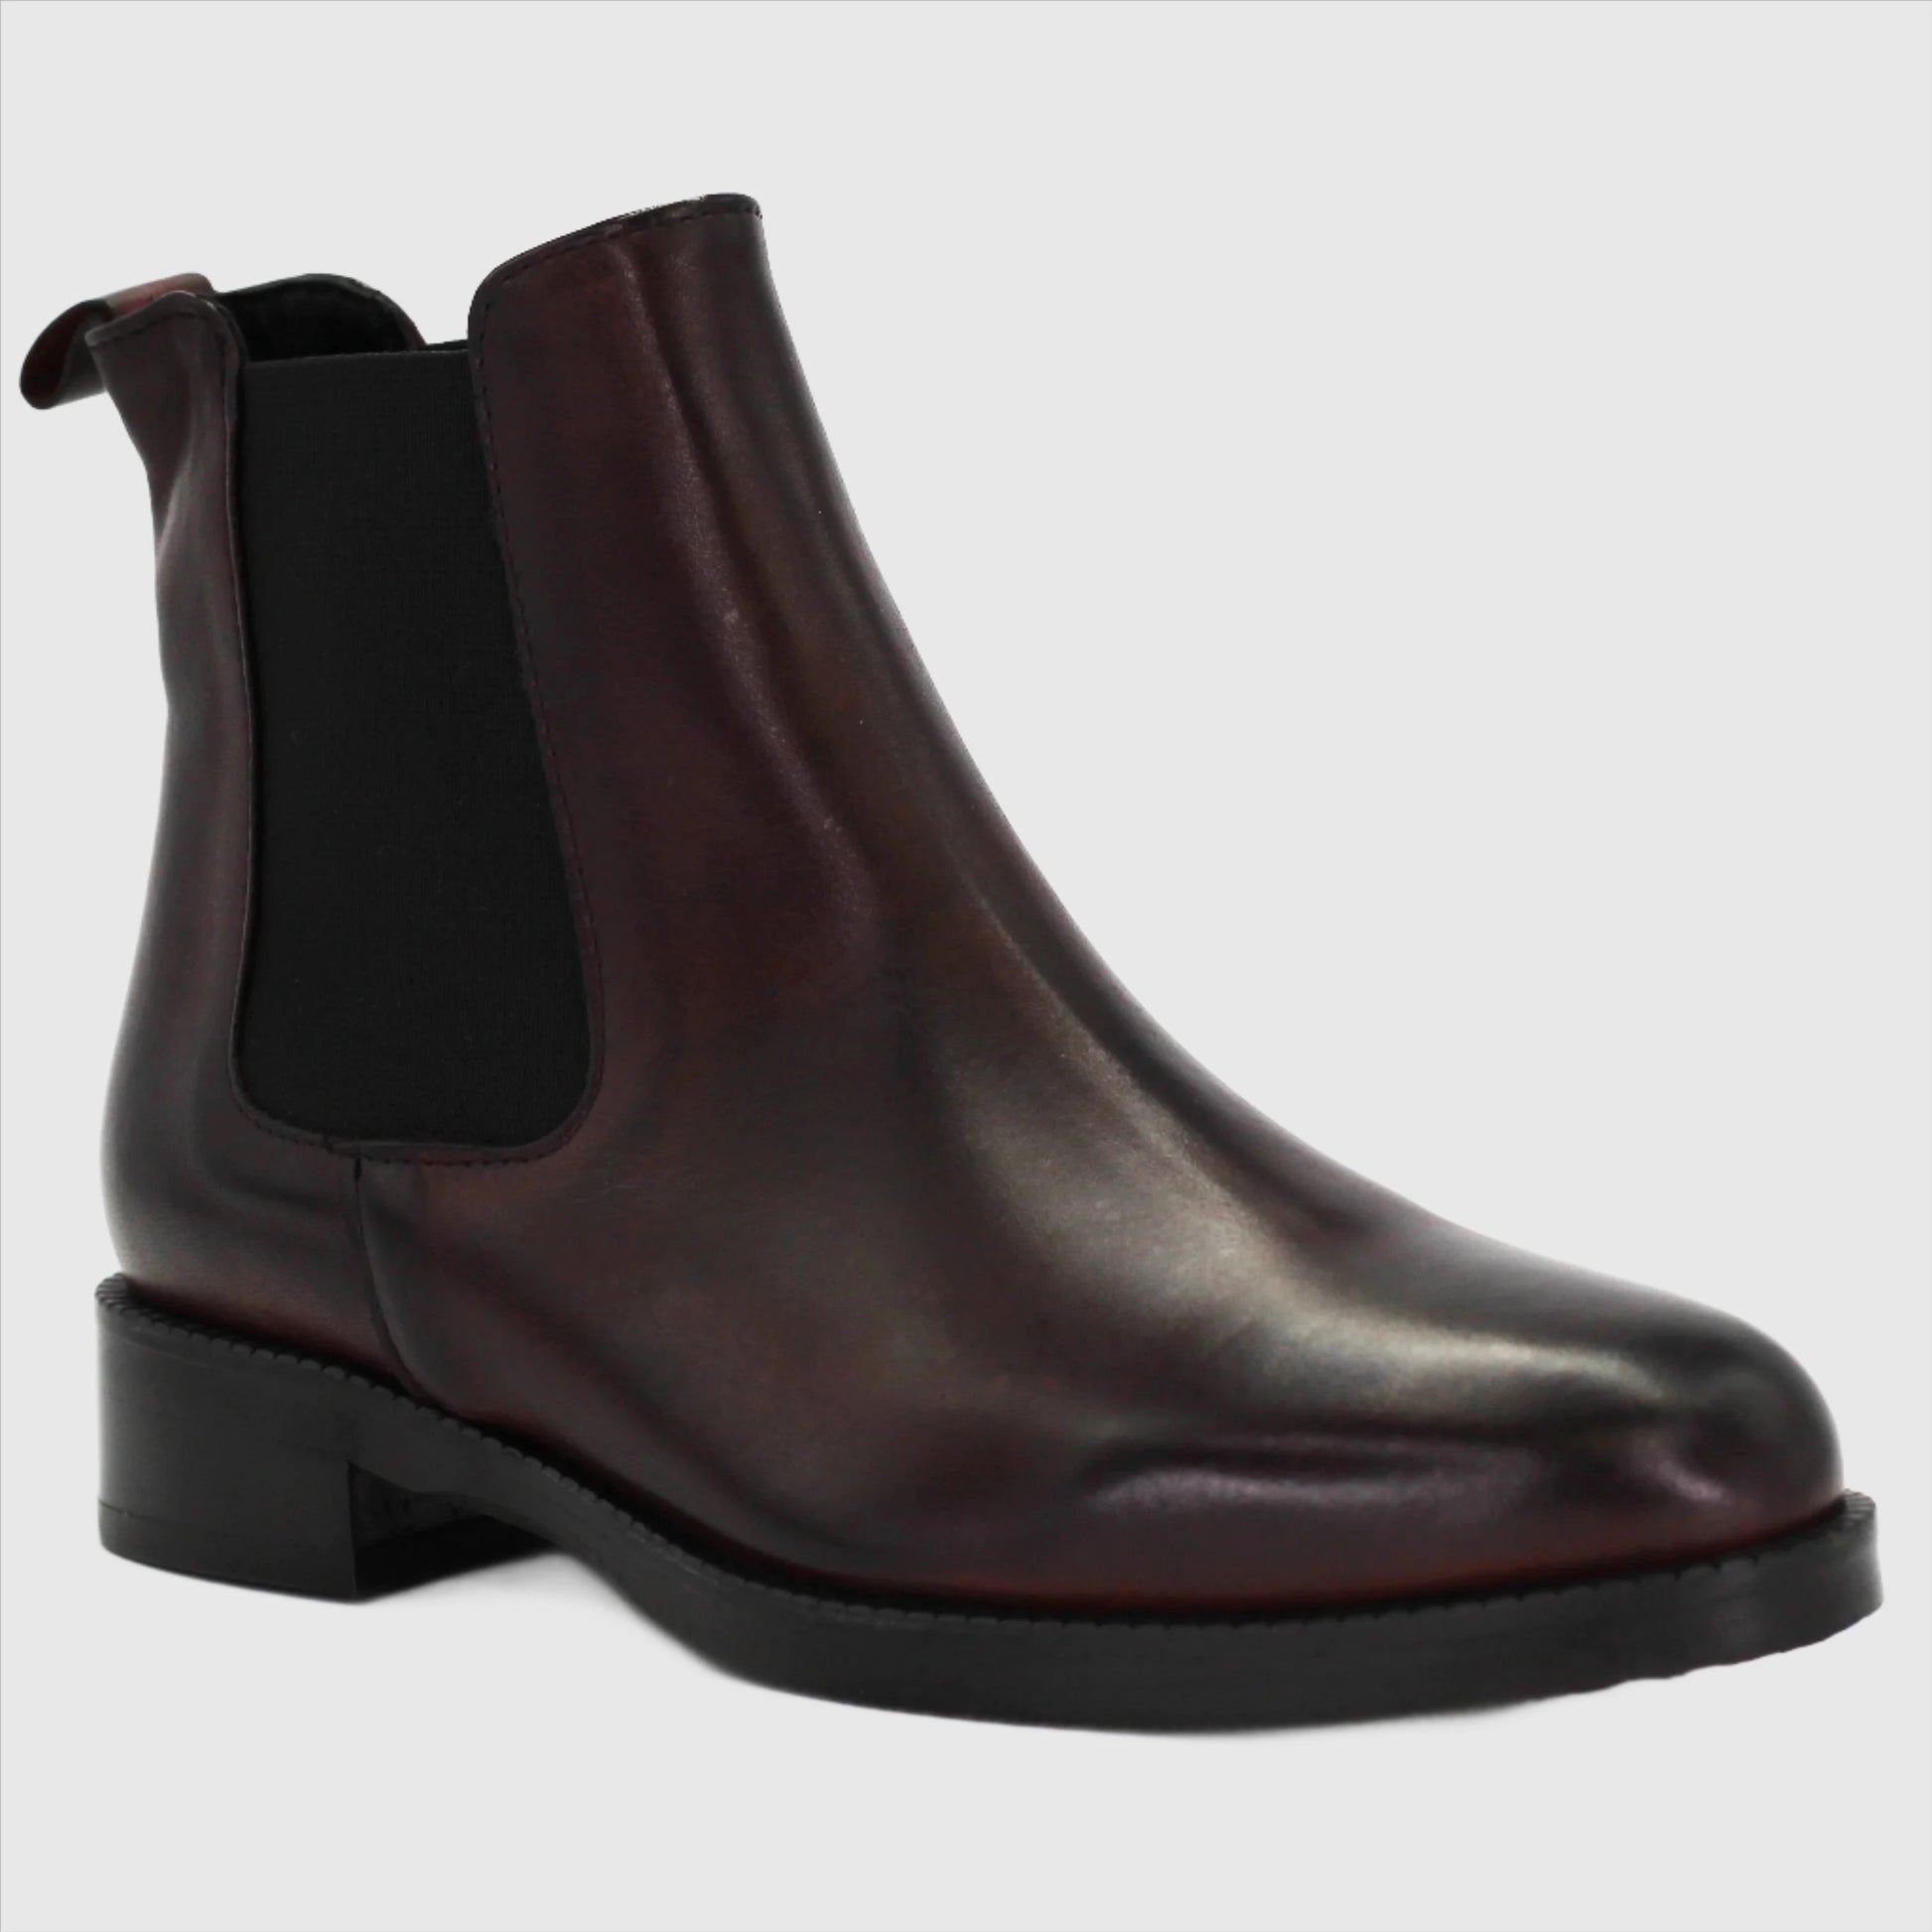 Shop Handmade Italian Leather chelsea boot in nature burnet (GC2030) or browse our range of hand-made Italian shoes in leather or suede in-store at Aliverti Cape Town, or shop online. We deliver in South Africa & offer multiple payment plans as well as accept multiple safe & secure payment methods.